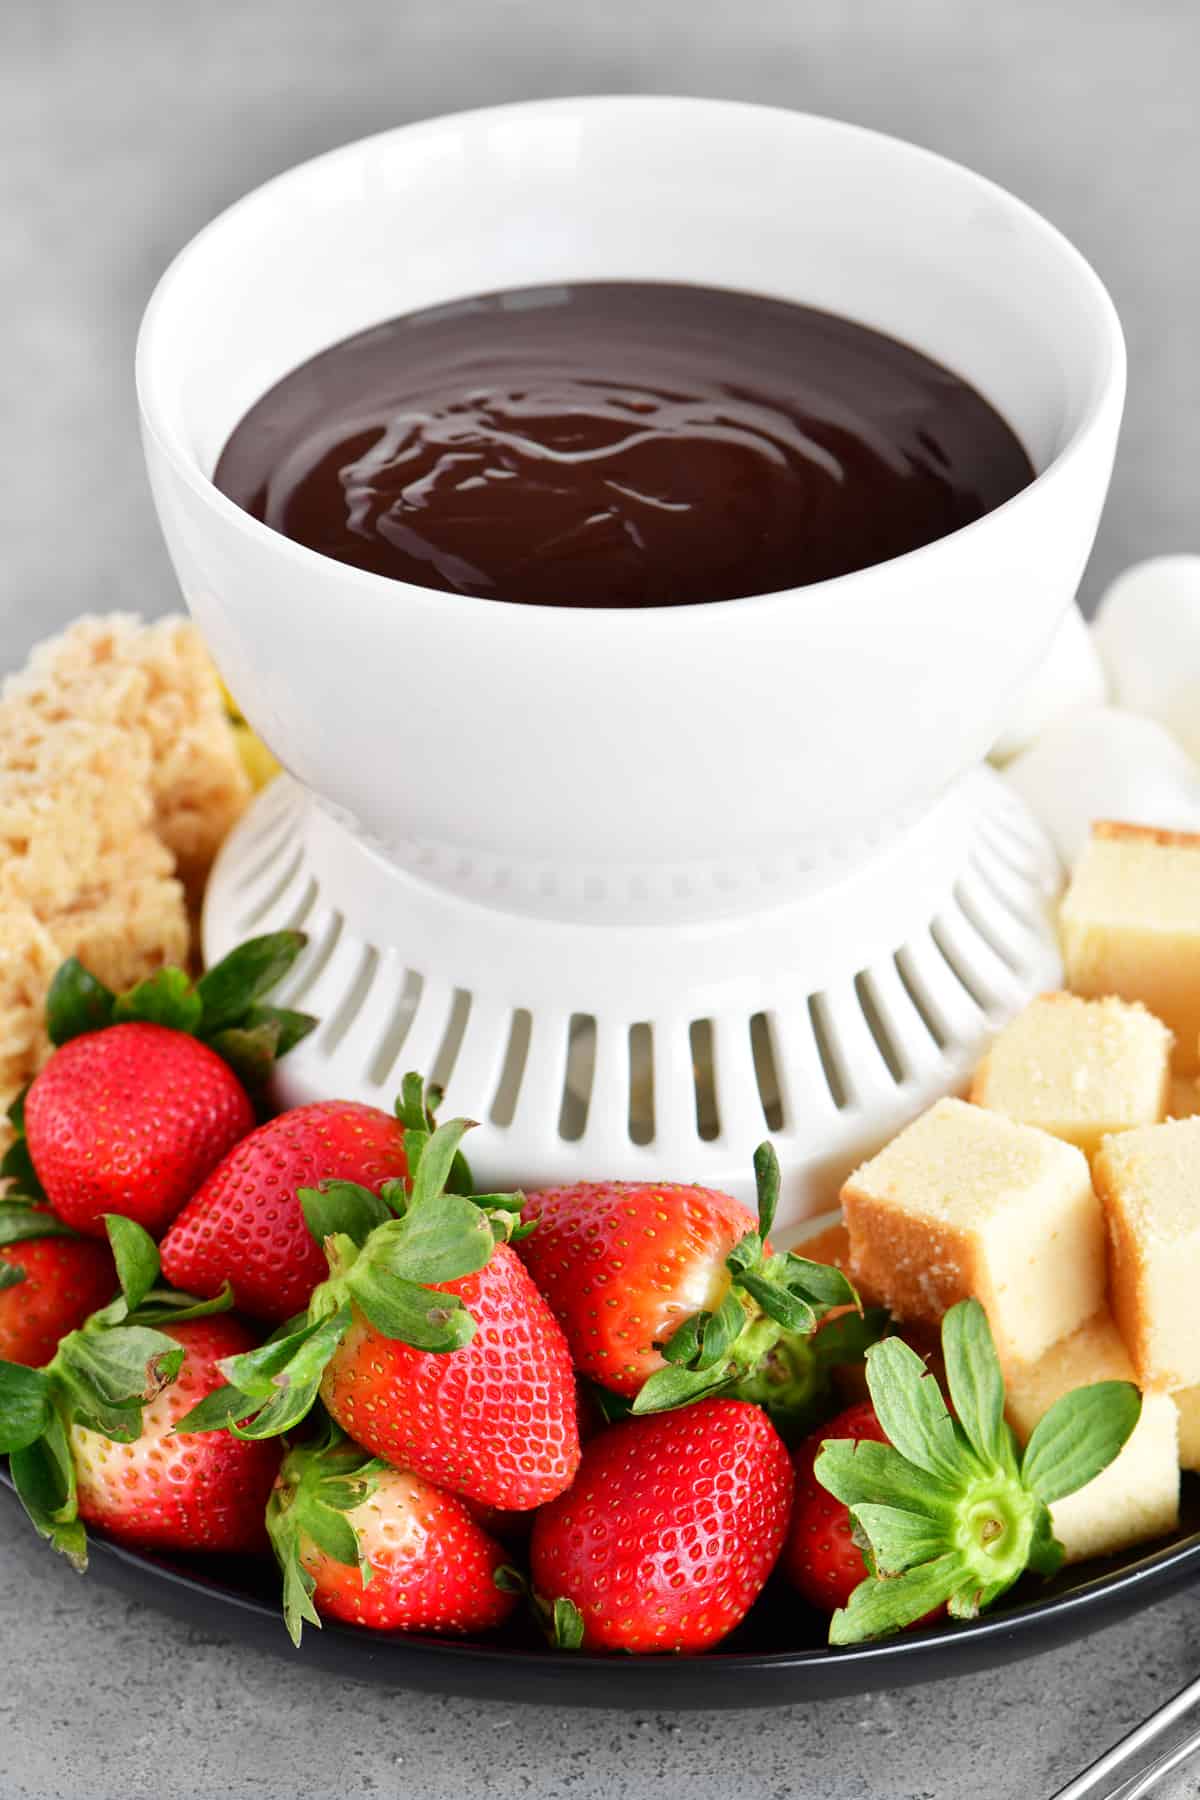 A fondue tray with strawberries and pound cake for dipping in chocolate.